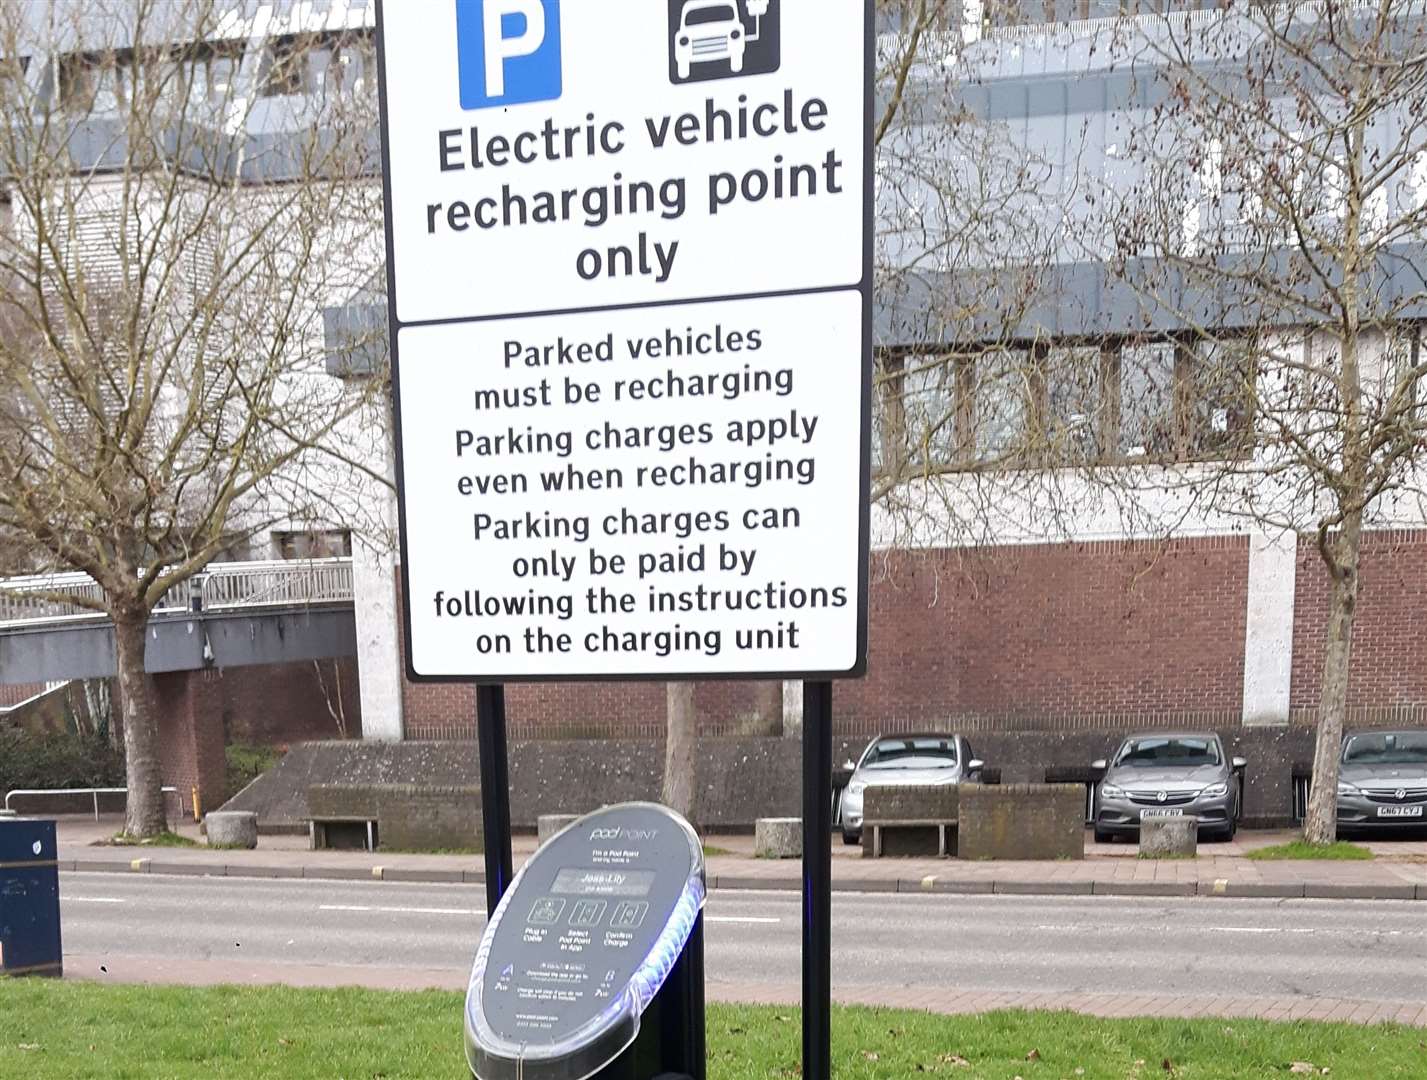 The AA says there will also need to be more emphasis placed on on-street charging points to help those who don't have off-street parking